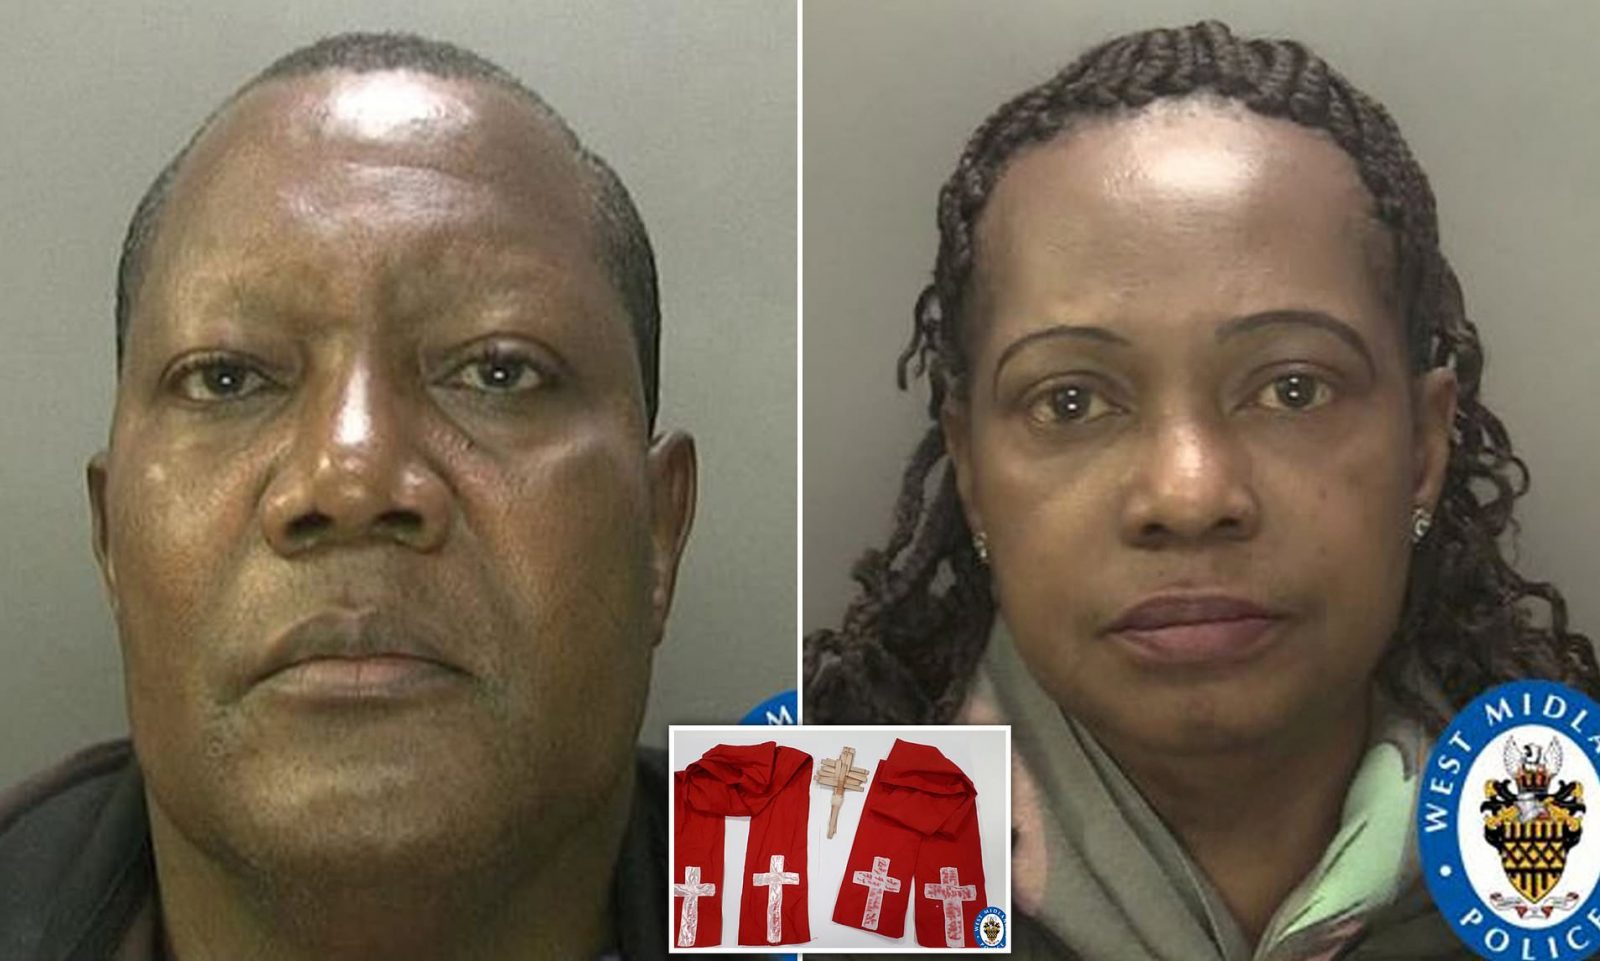 Nigerian Pastor Arrested In UK For Raping Children, Adults With Support of Wife